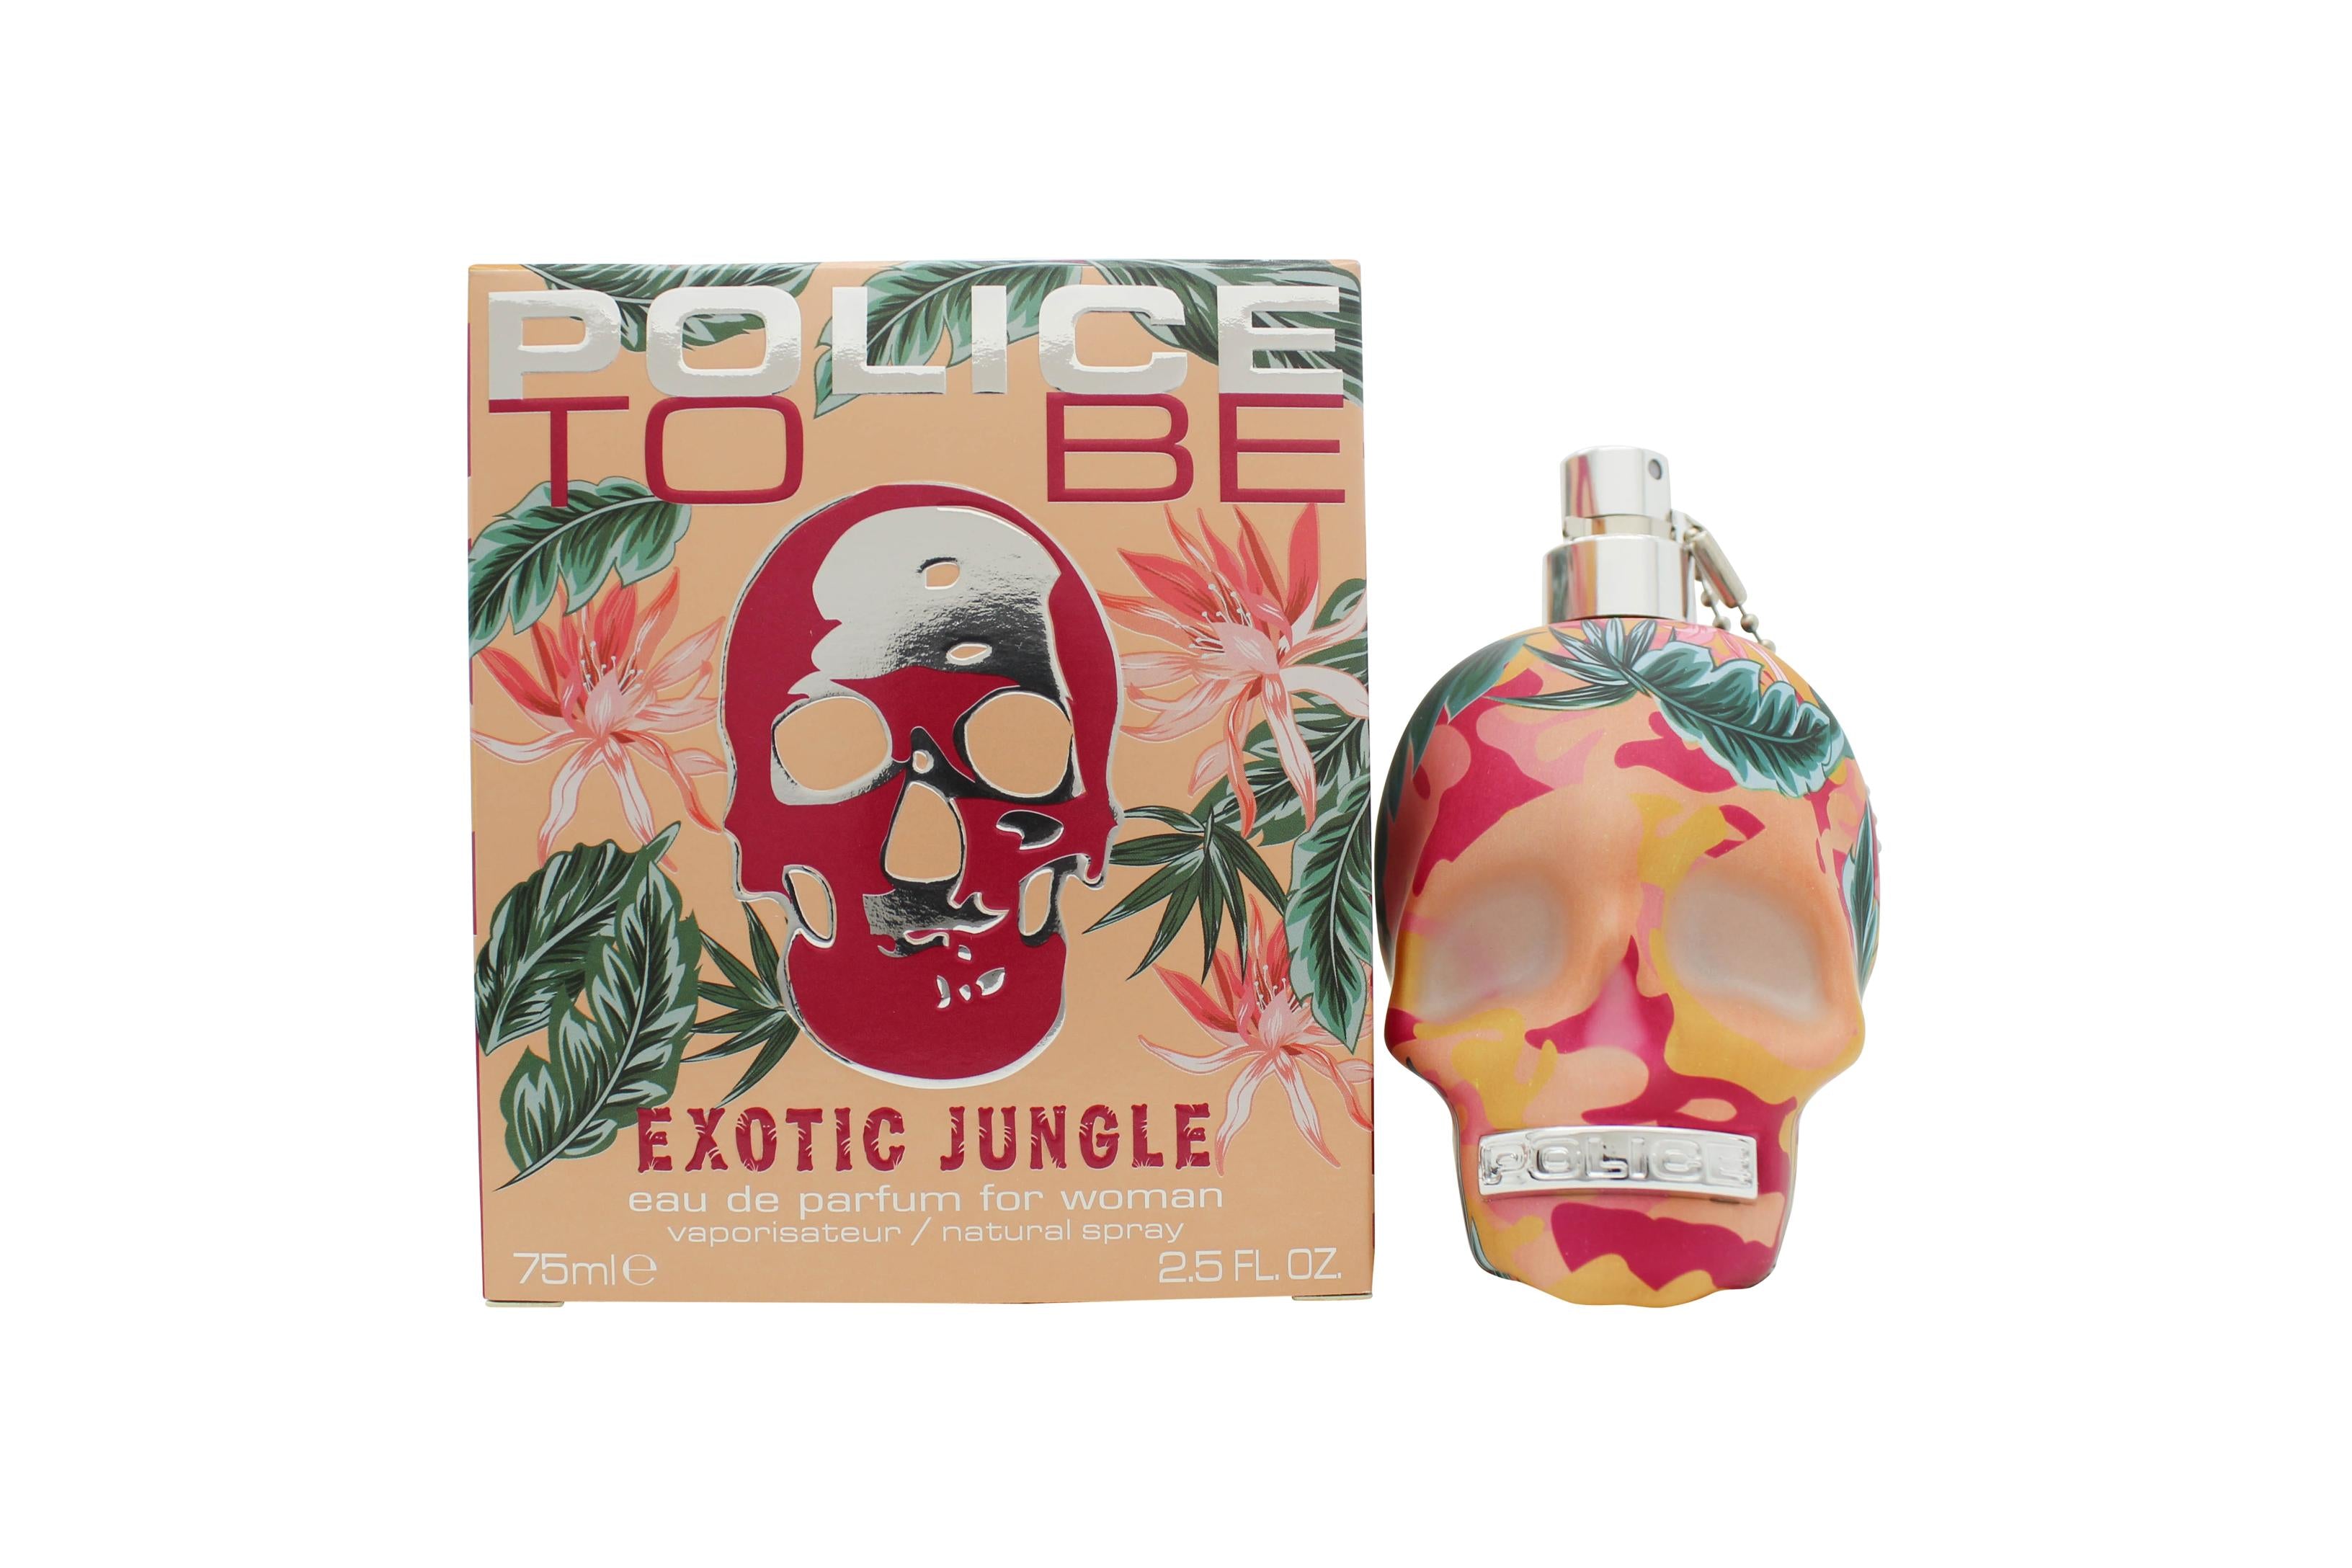 View Police To Be Exotic Jungle For Woman Eau de Parfum 75ml Spray information